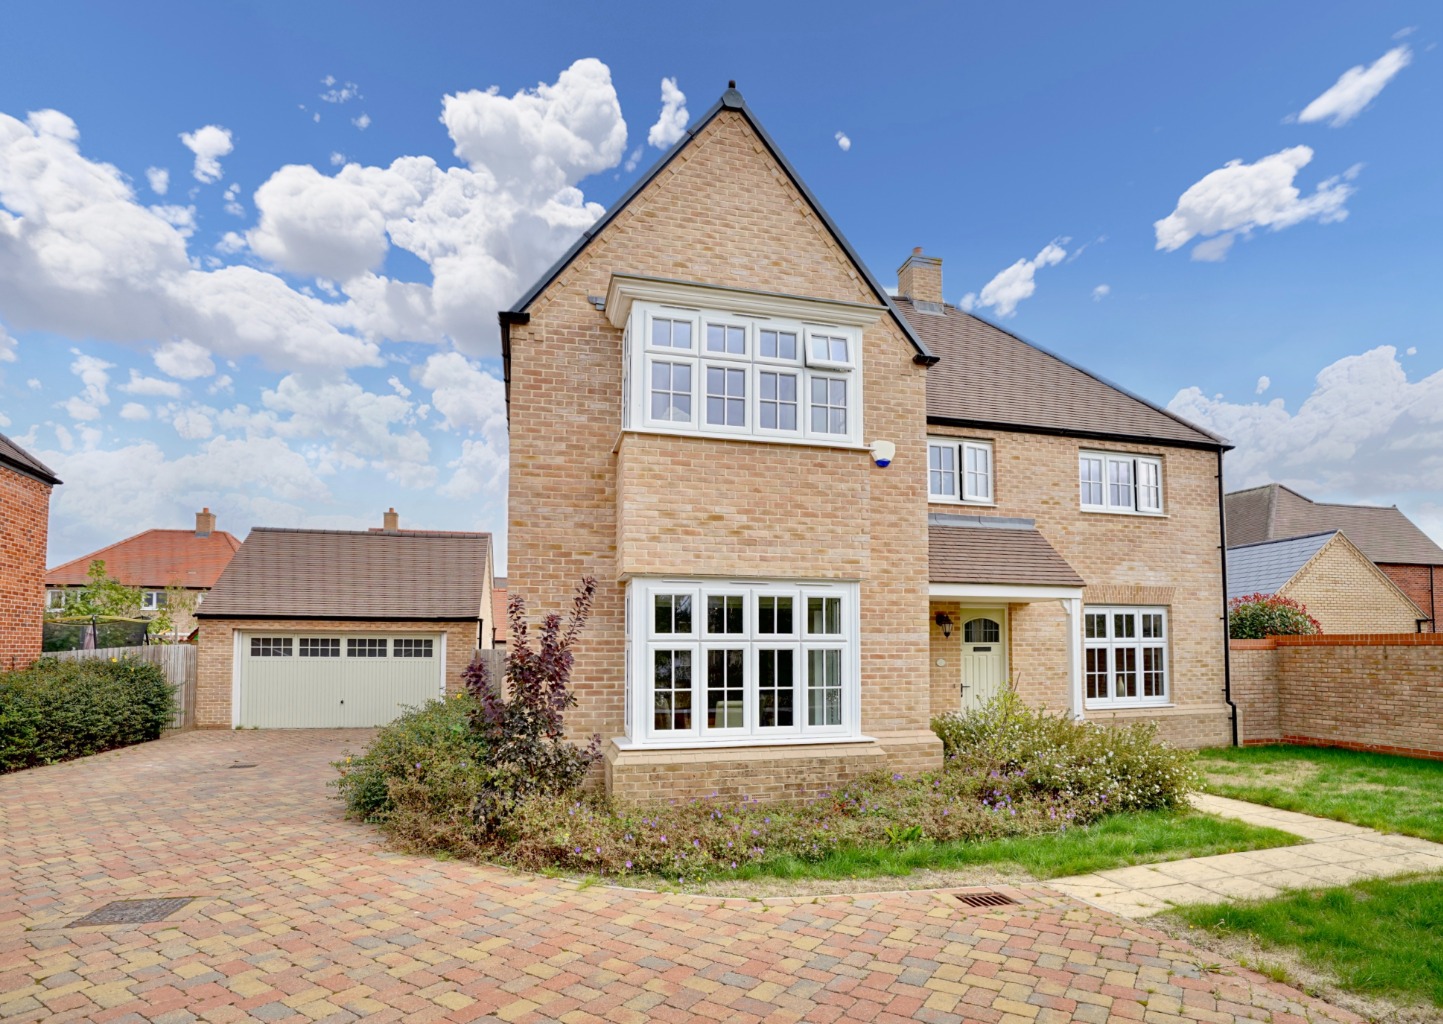 4 bed detached house for sale in Bedell Road, Huntingdon - Property Image 1